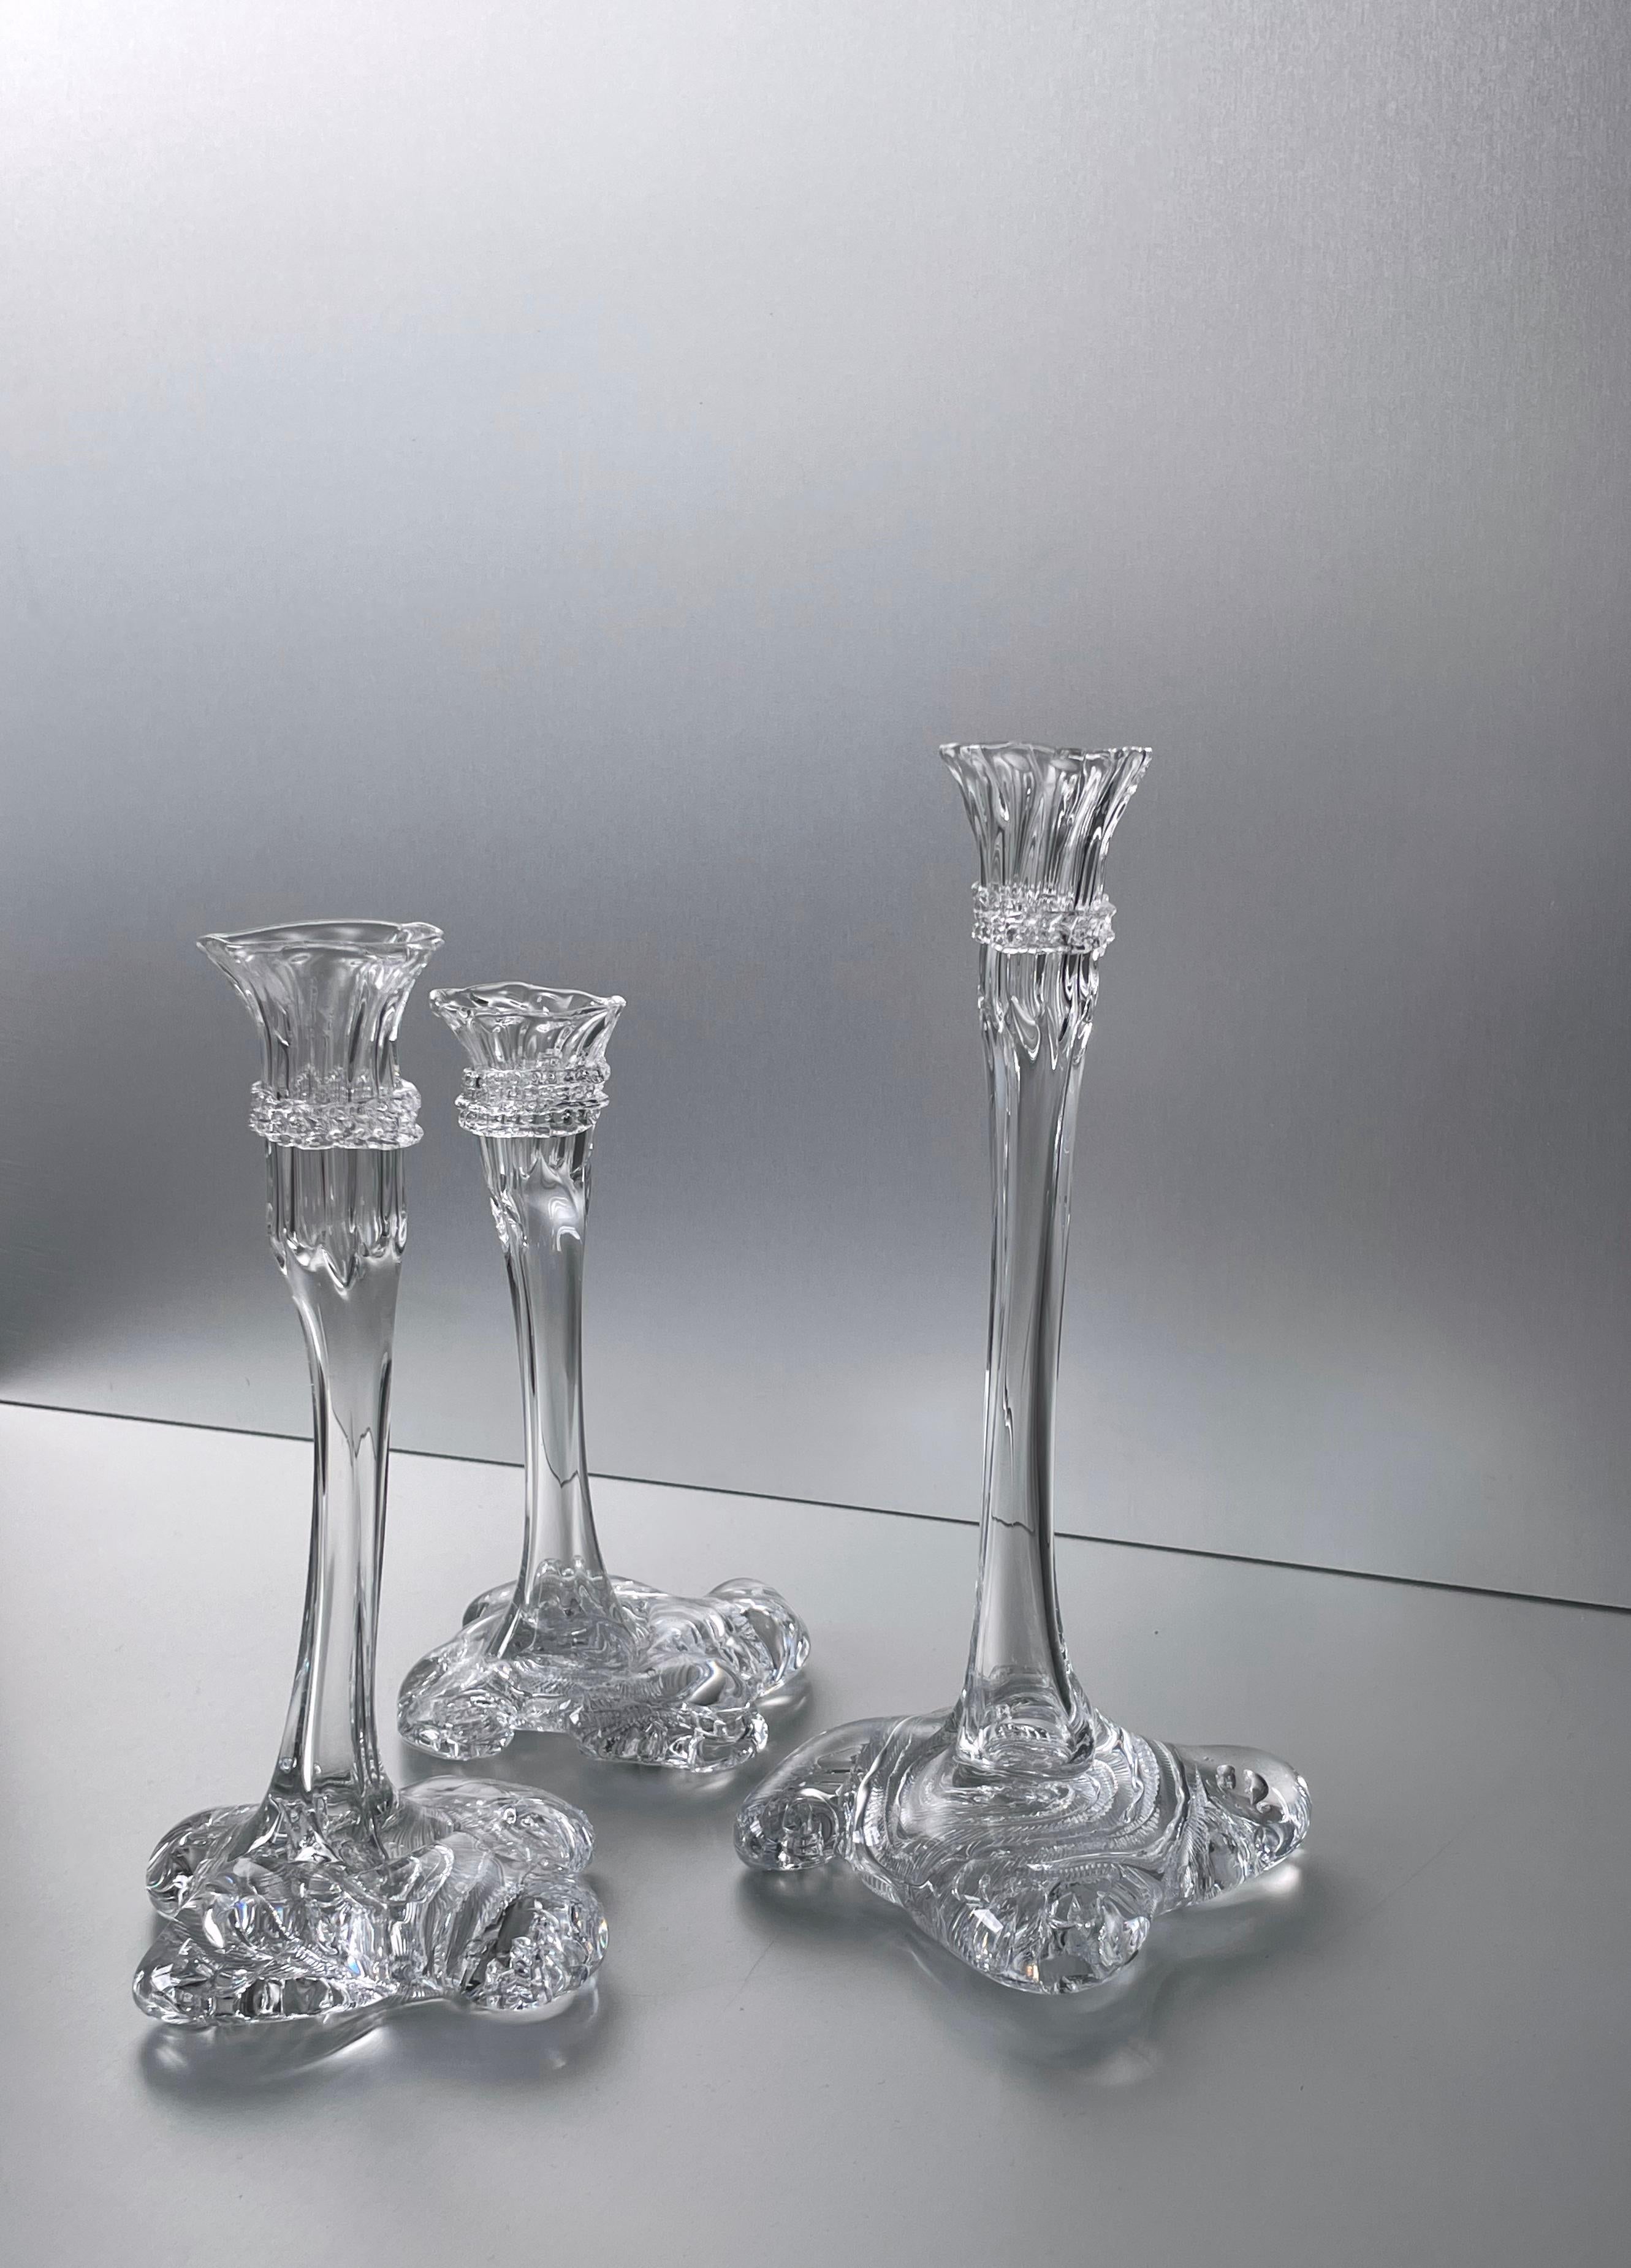 All of the glassware is mouth blown by Alexander Kirkeby in Denmark. Every piece is therefore unique and will differ slightly in size and decoration.
47
Alexander Kirkeby is a glassblower and designer working within material and object design. In